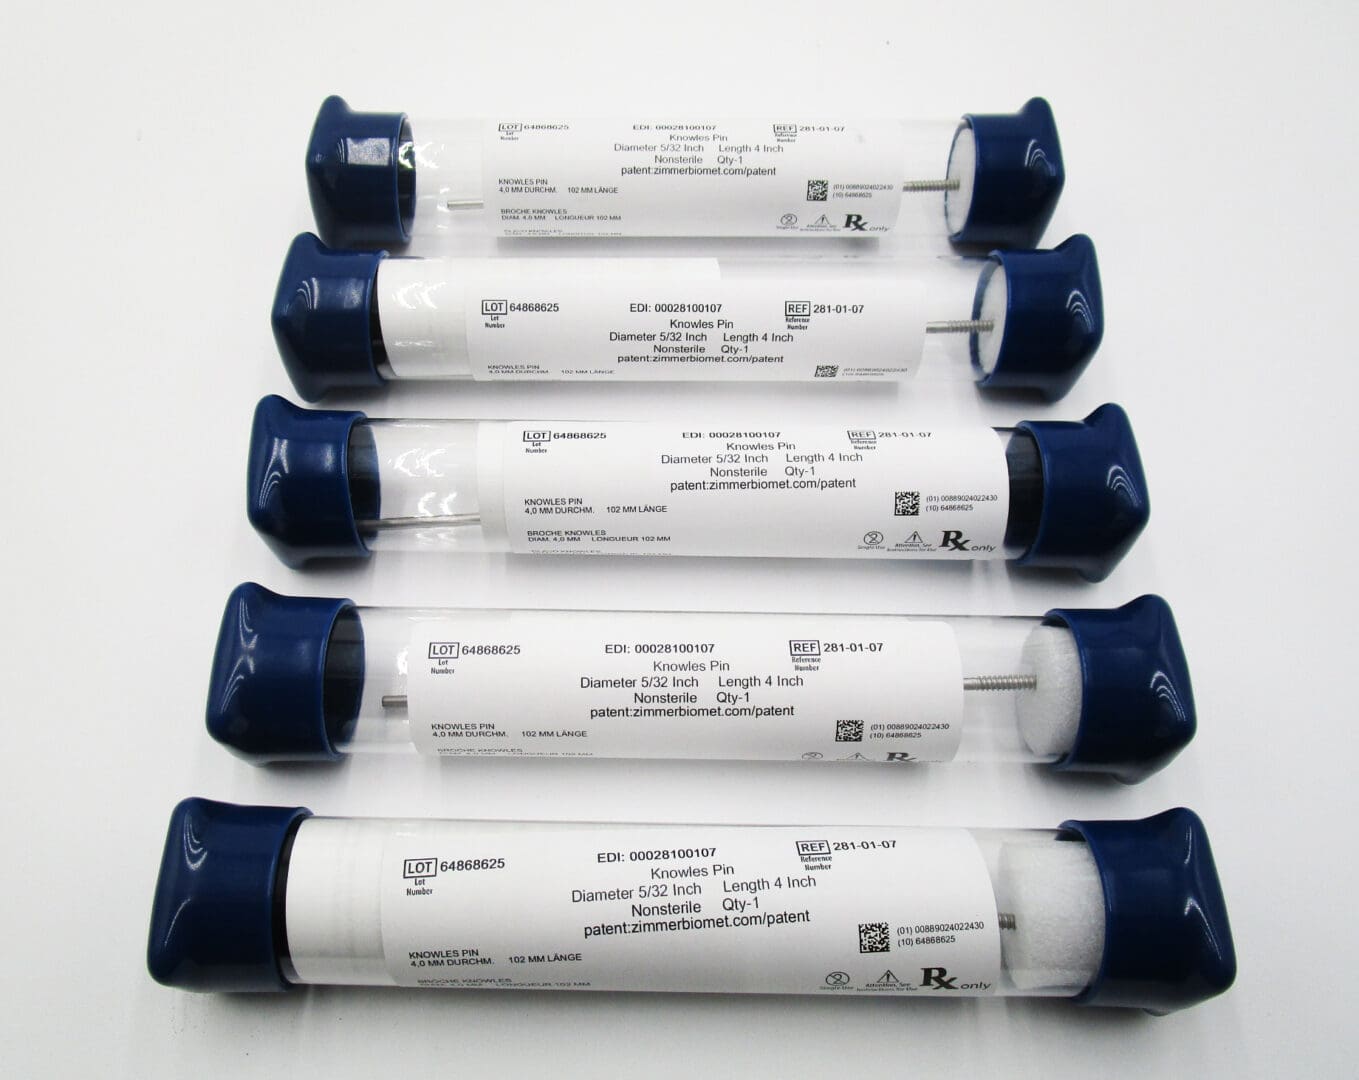 A group of six tubes with blue caps on them.